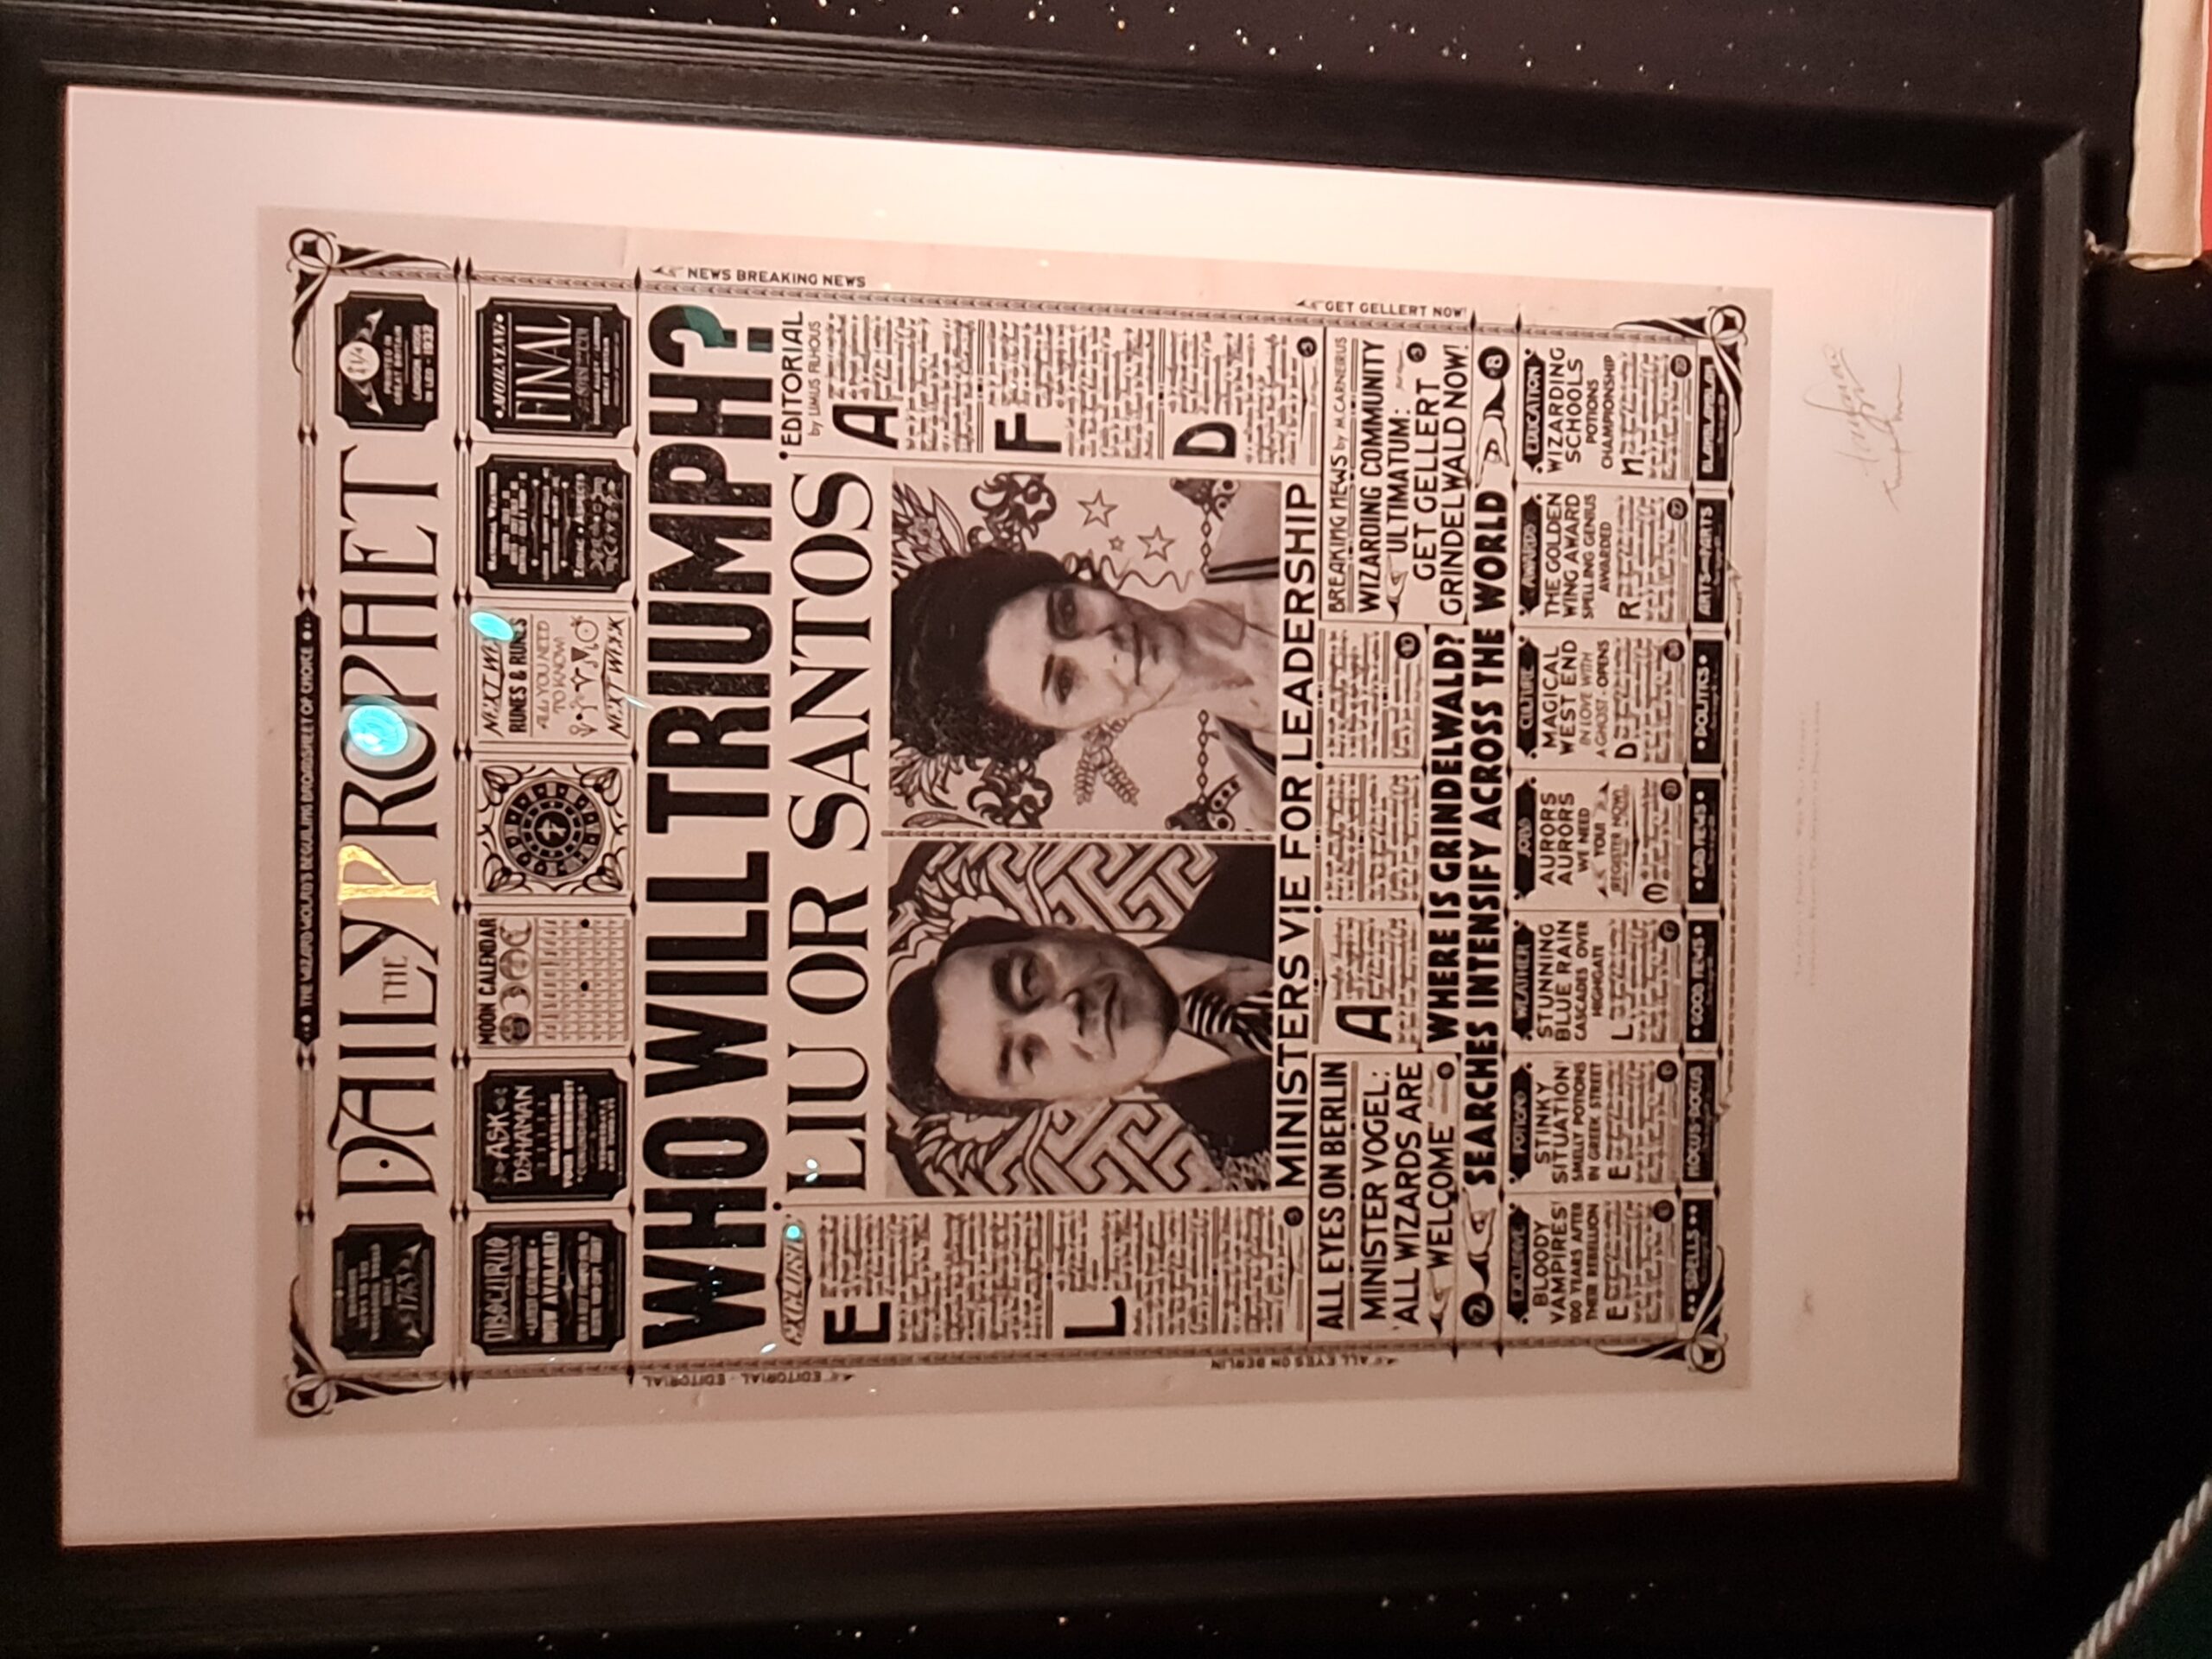 Front page of “The Daily Prophet” designed by MinaLima for “Fantastic Beasts: The Secrets of Dumbledore.”